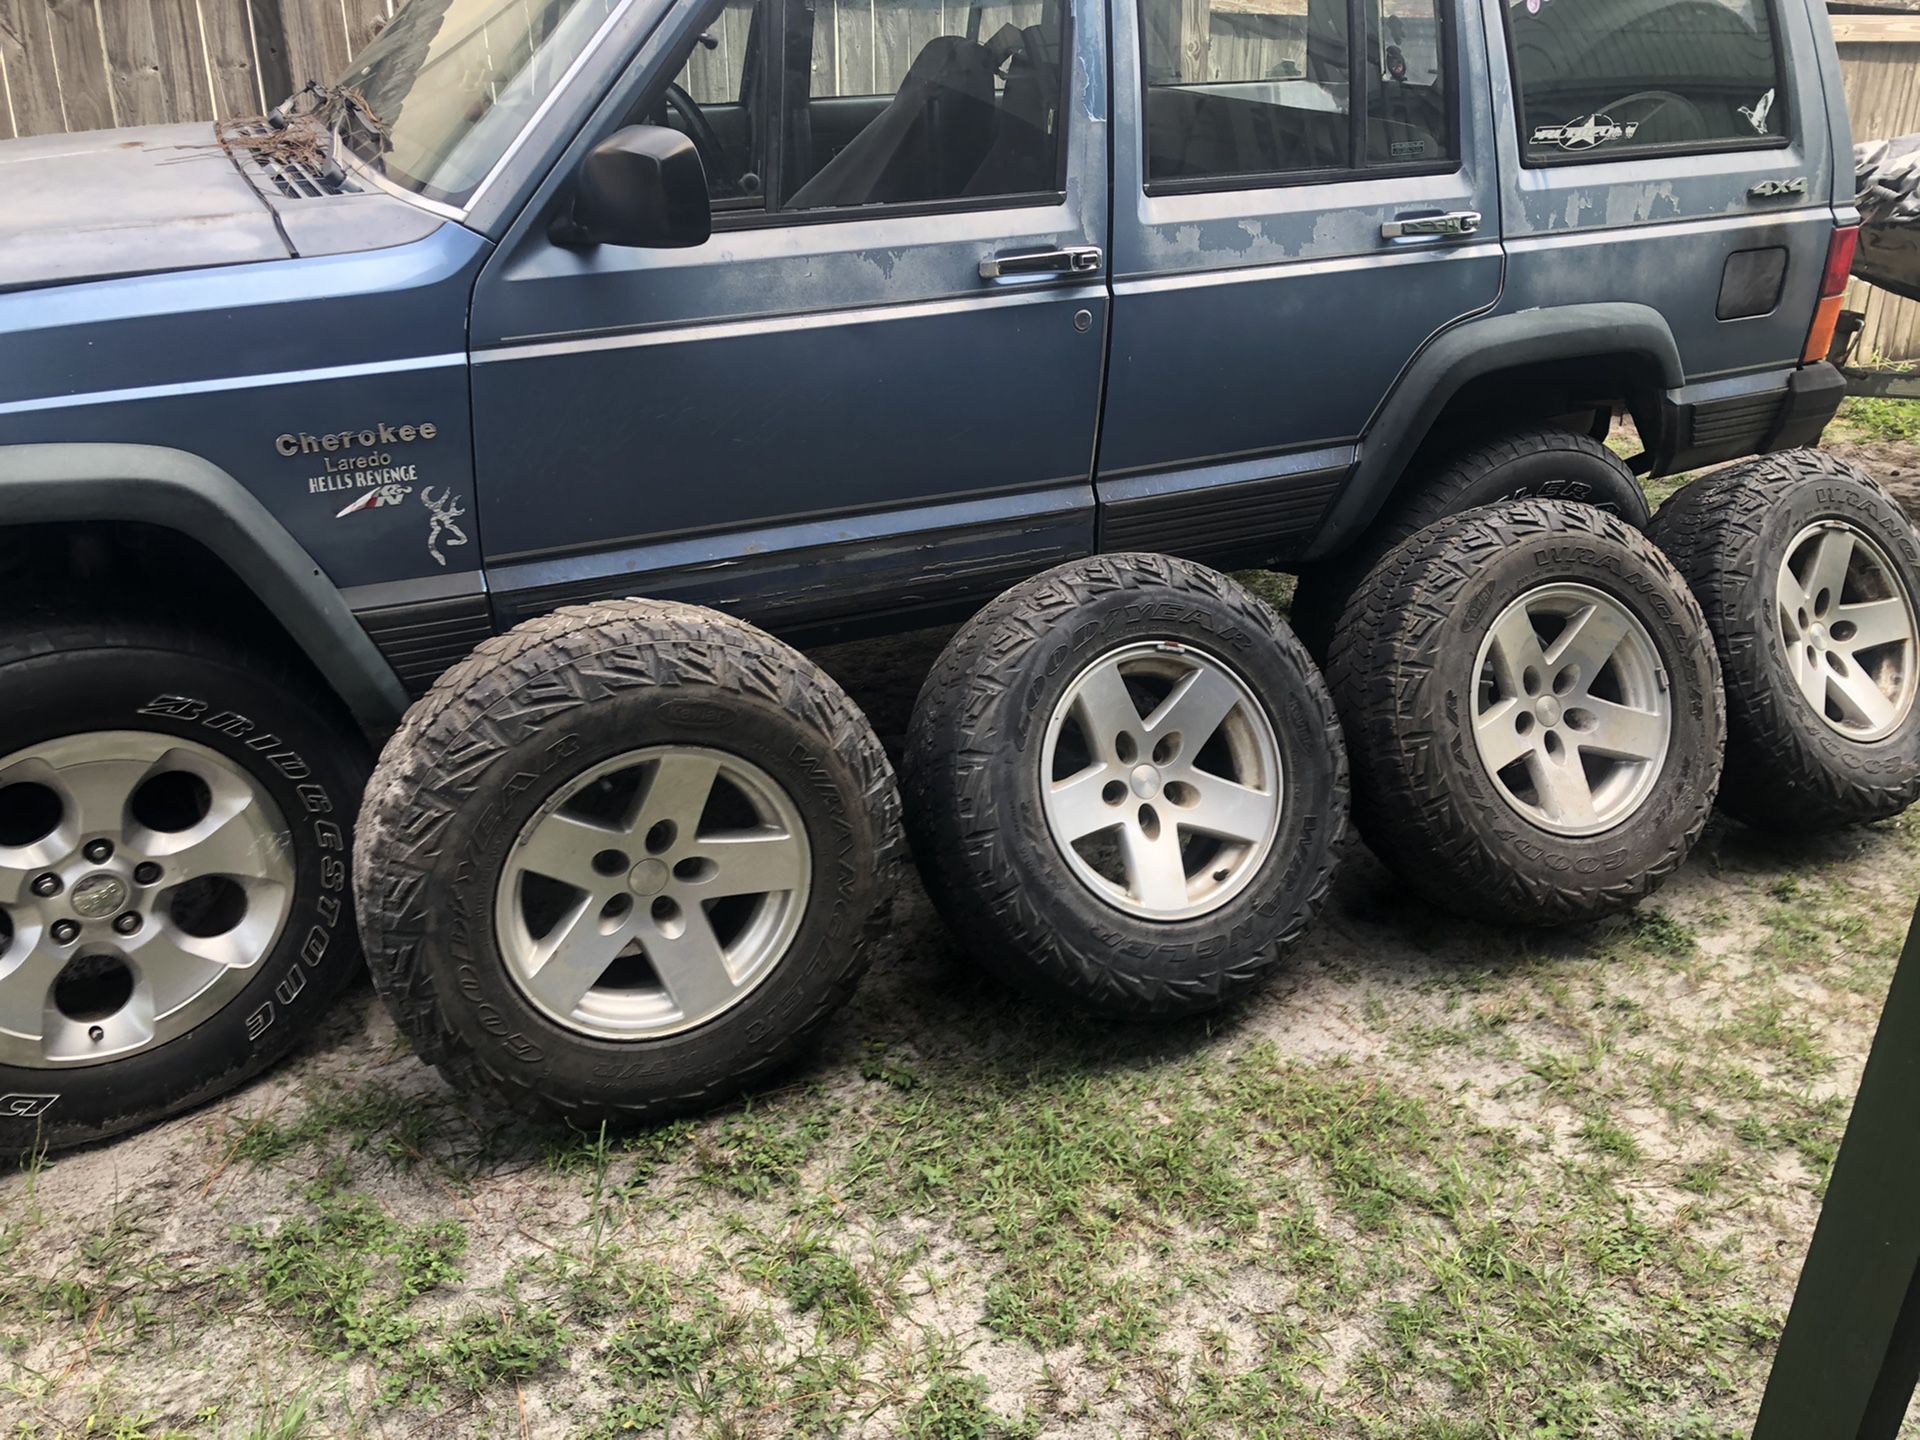 16 inch jeep Rubicon rims with a brand new Kevlar Goodyear MTR spare